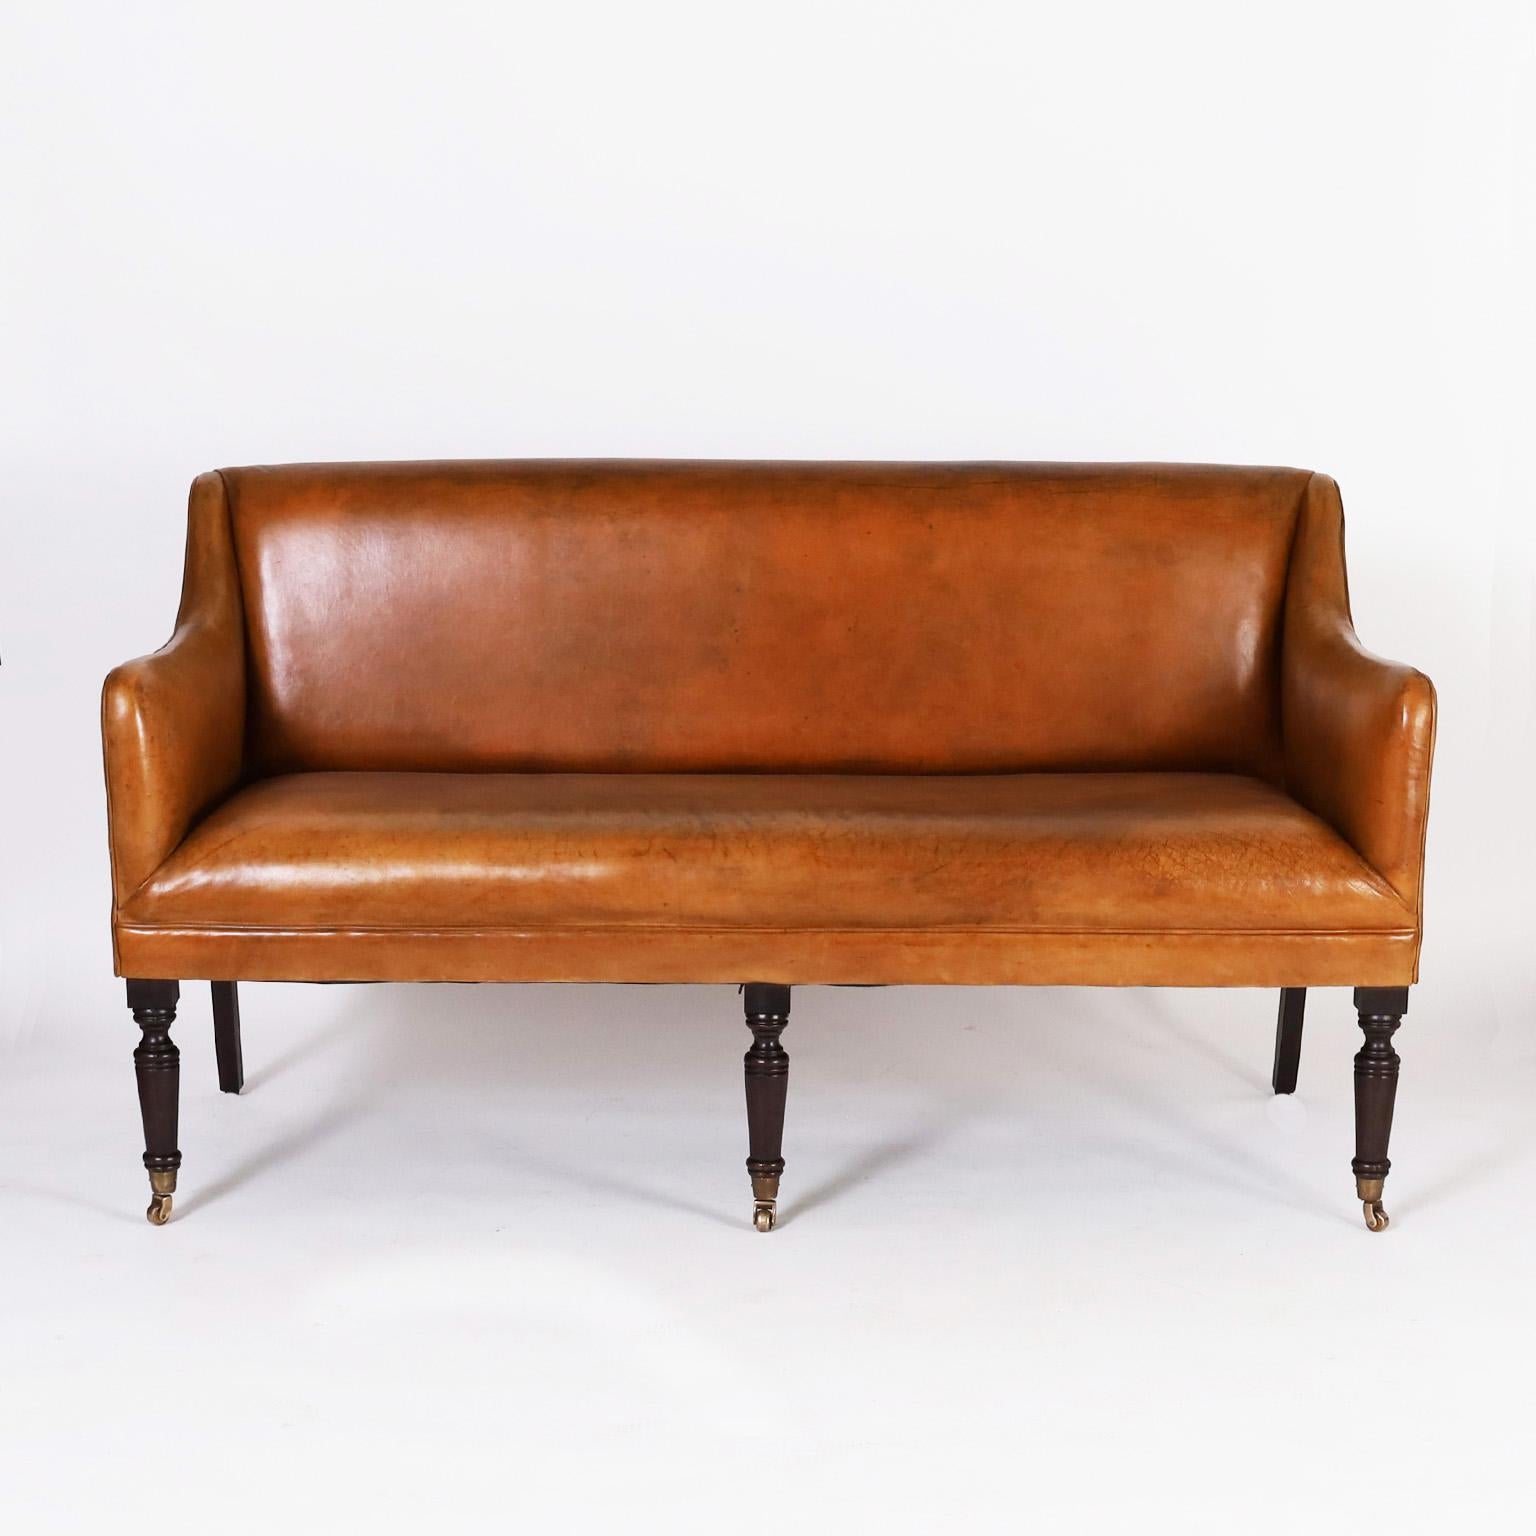 Handsome Georgian style settee upholstered in soft comfortable brown leather in classic form on turned mahogany front legs with brass casters. Signed Ralph Lauren on the bottom.